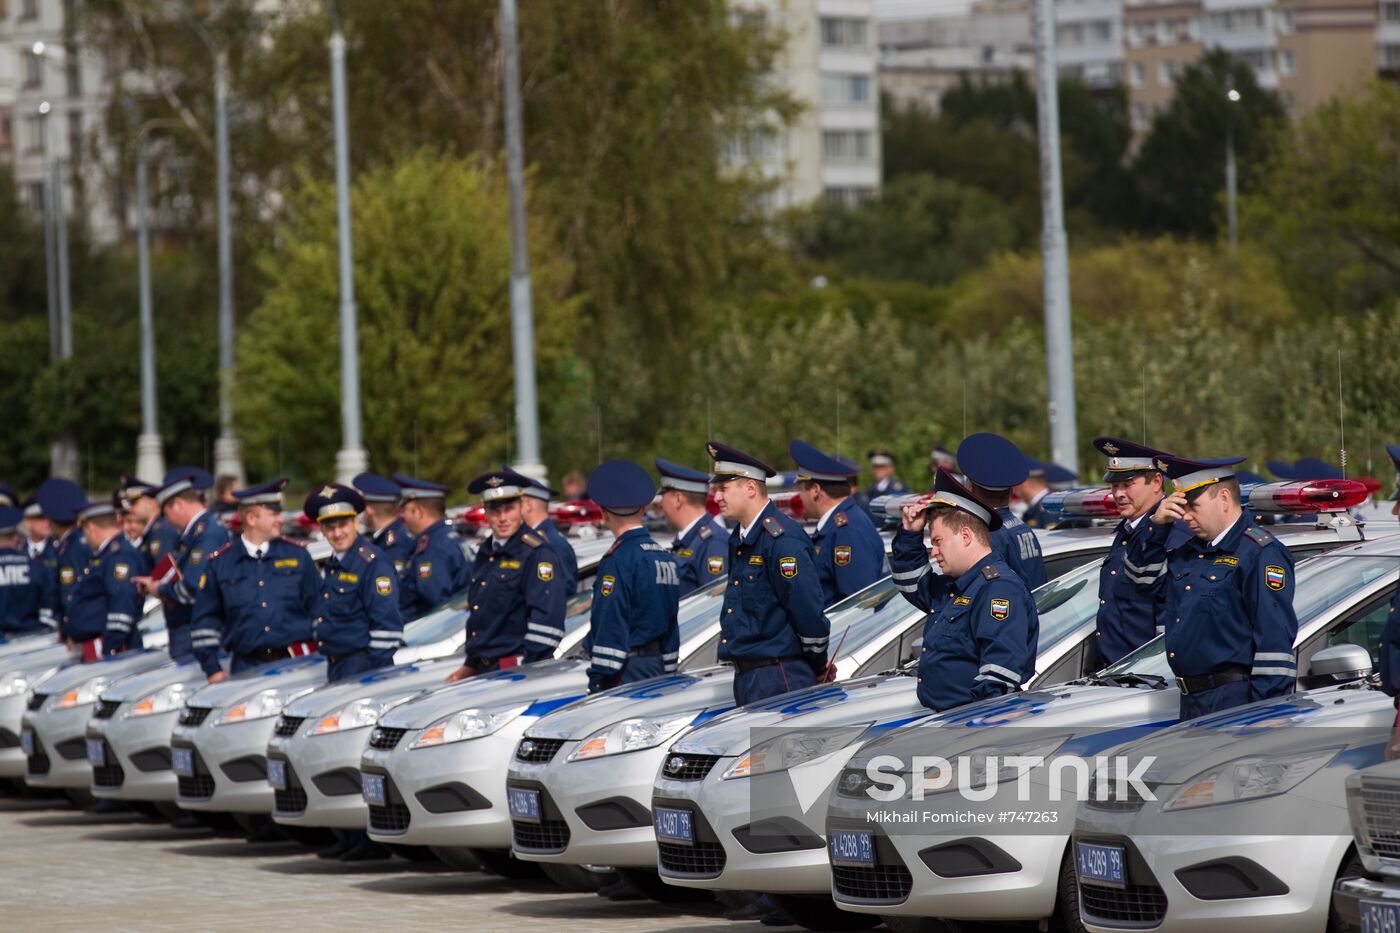 Moscow's Southwestern district police receive 70 cars